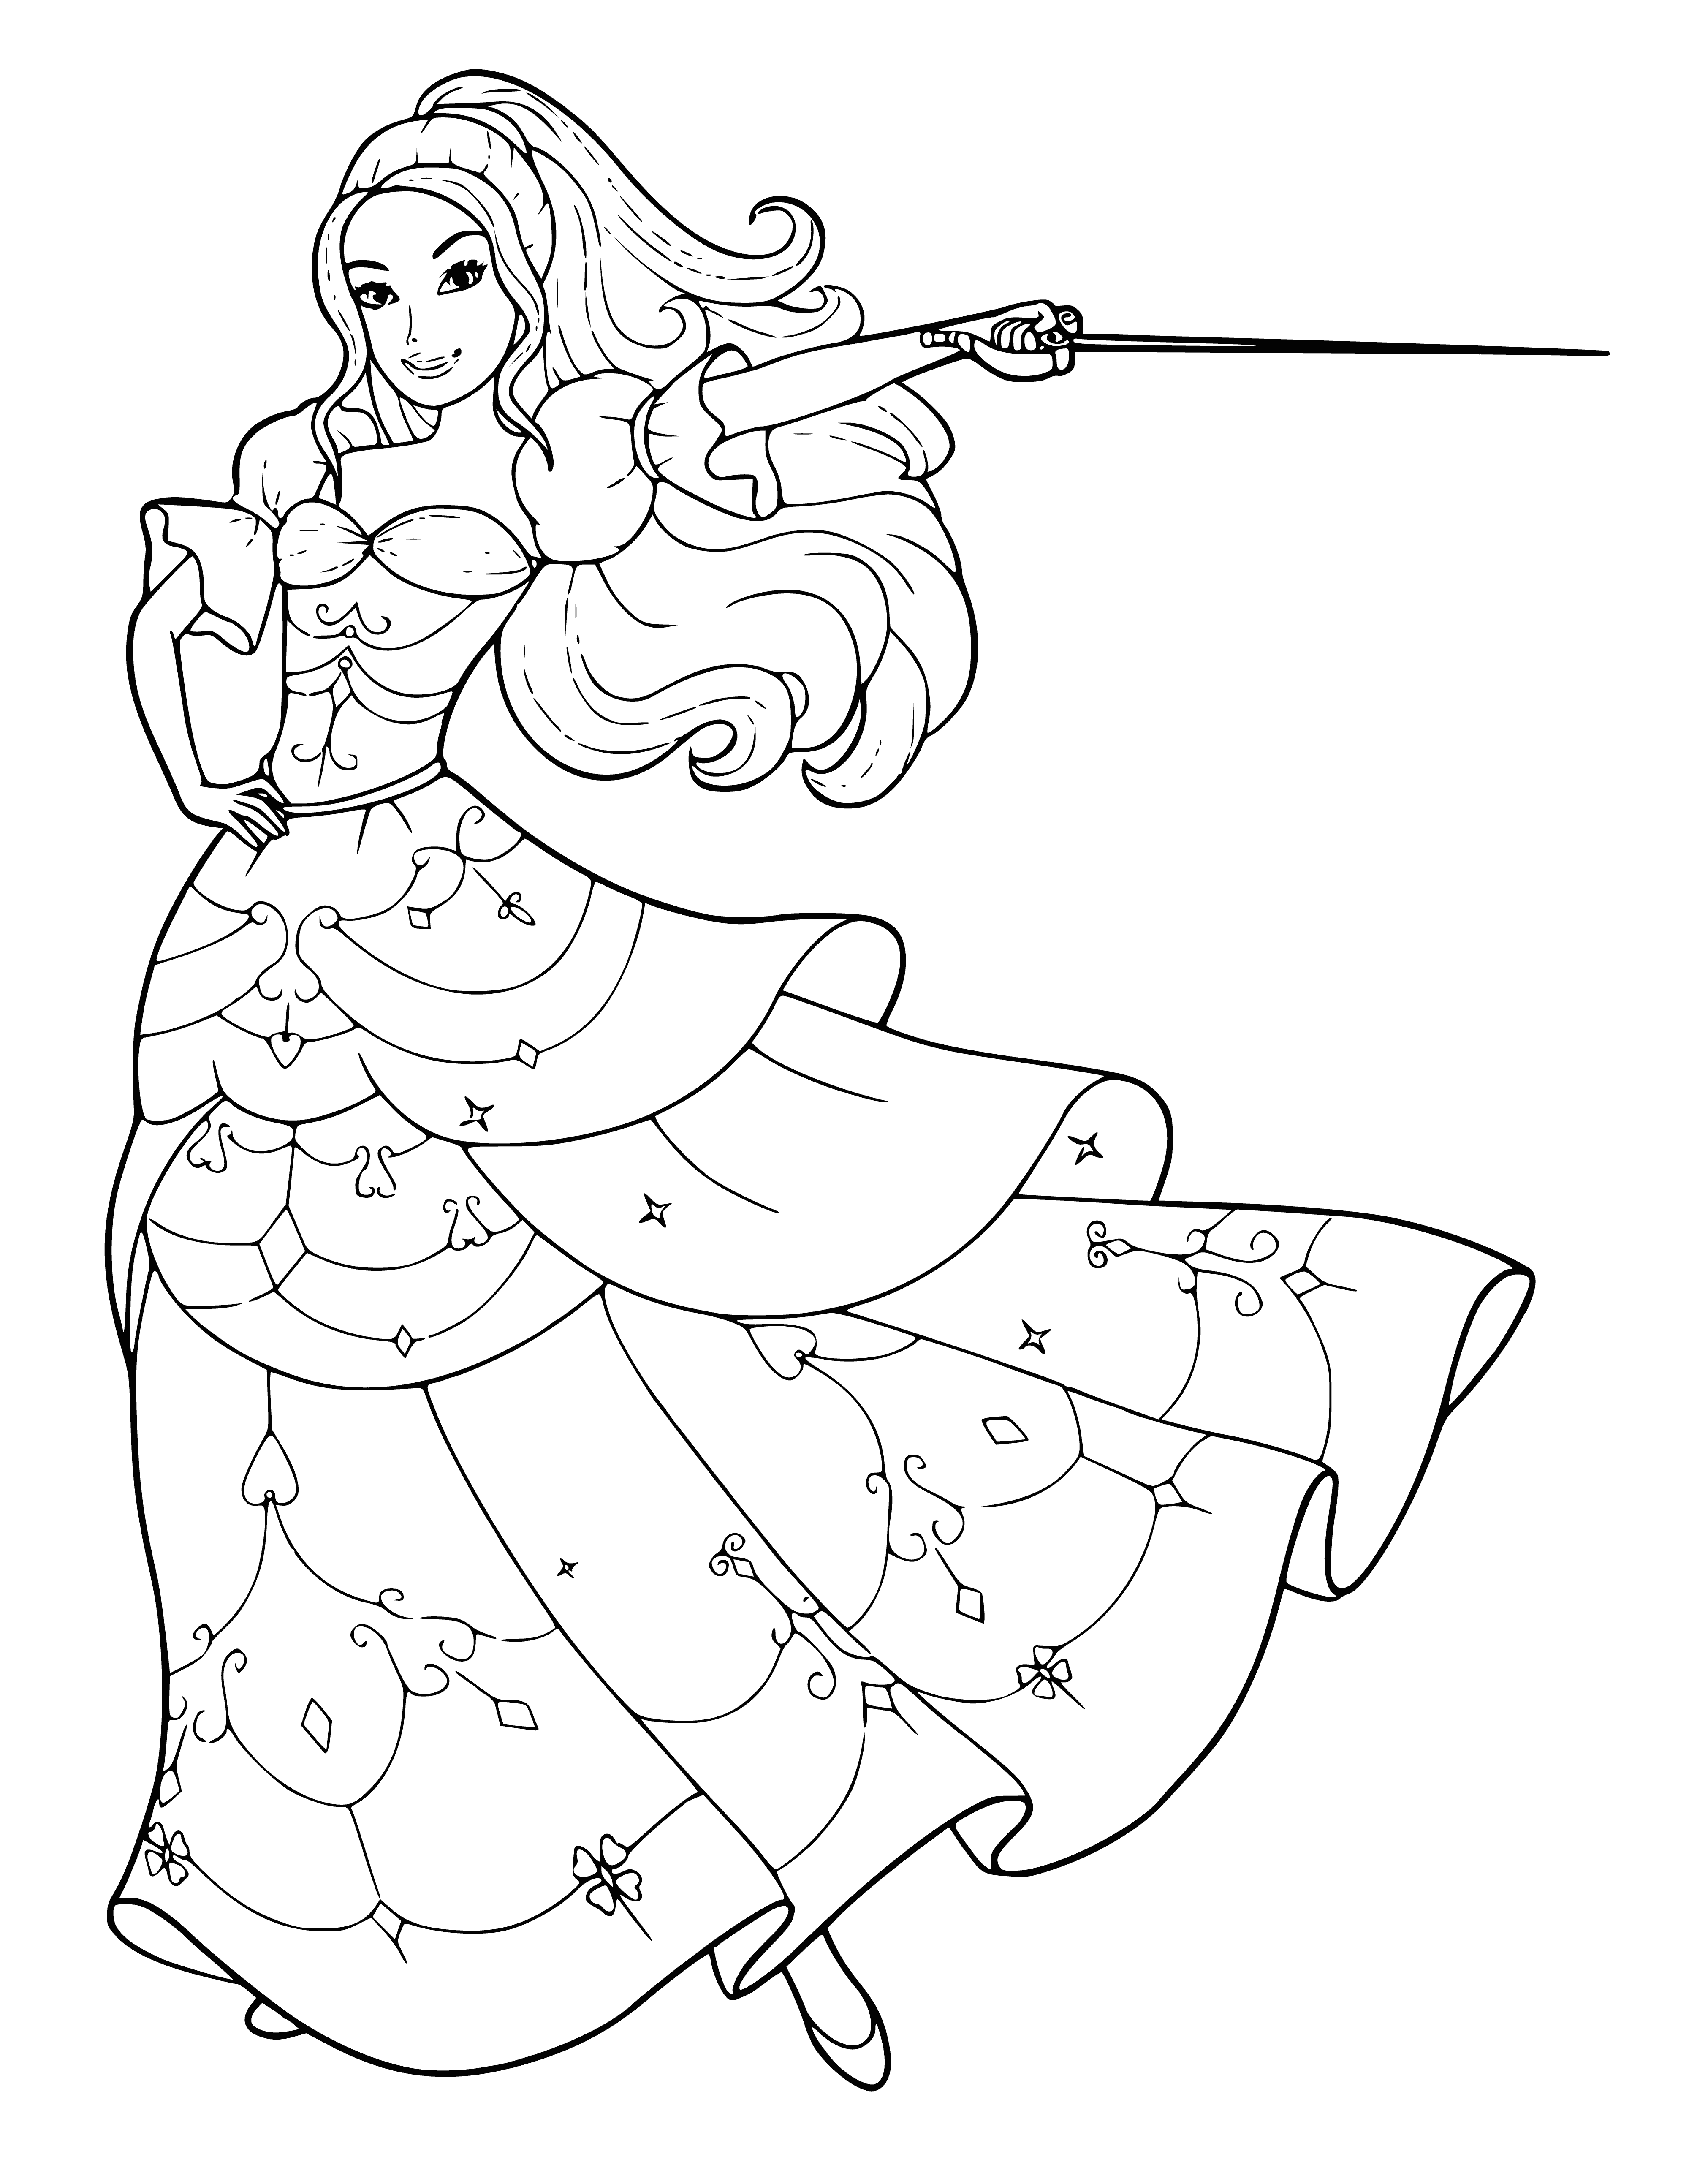 coloring page: Blonde Barbie holds sword in right hand, wearing purple/white dress w/ white cape. Serious expression on face. #Barbie